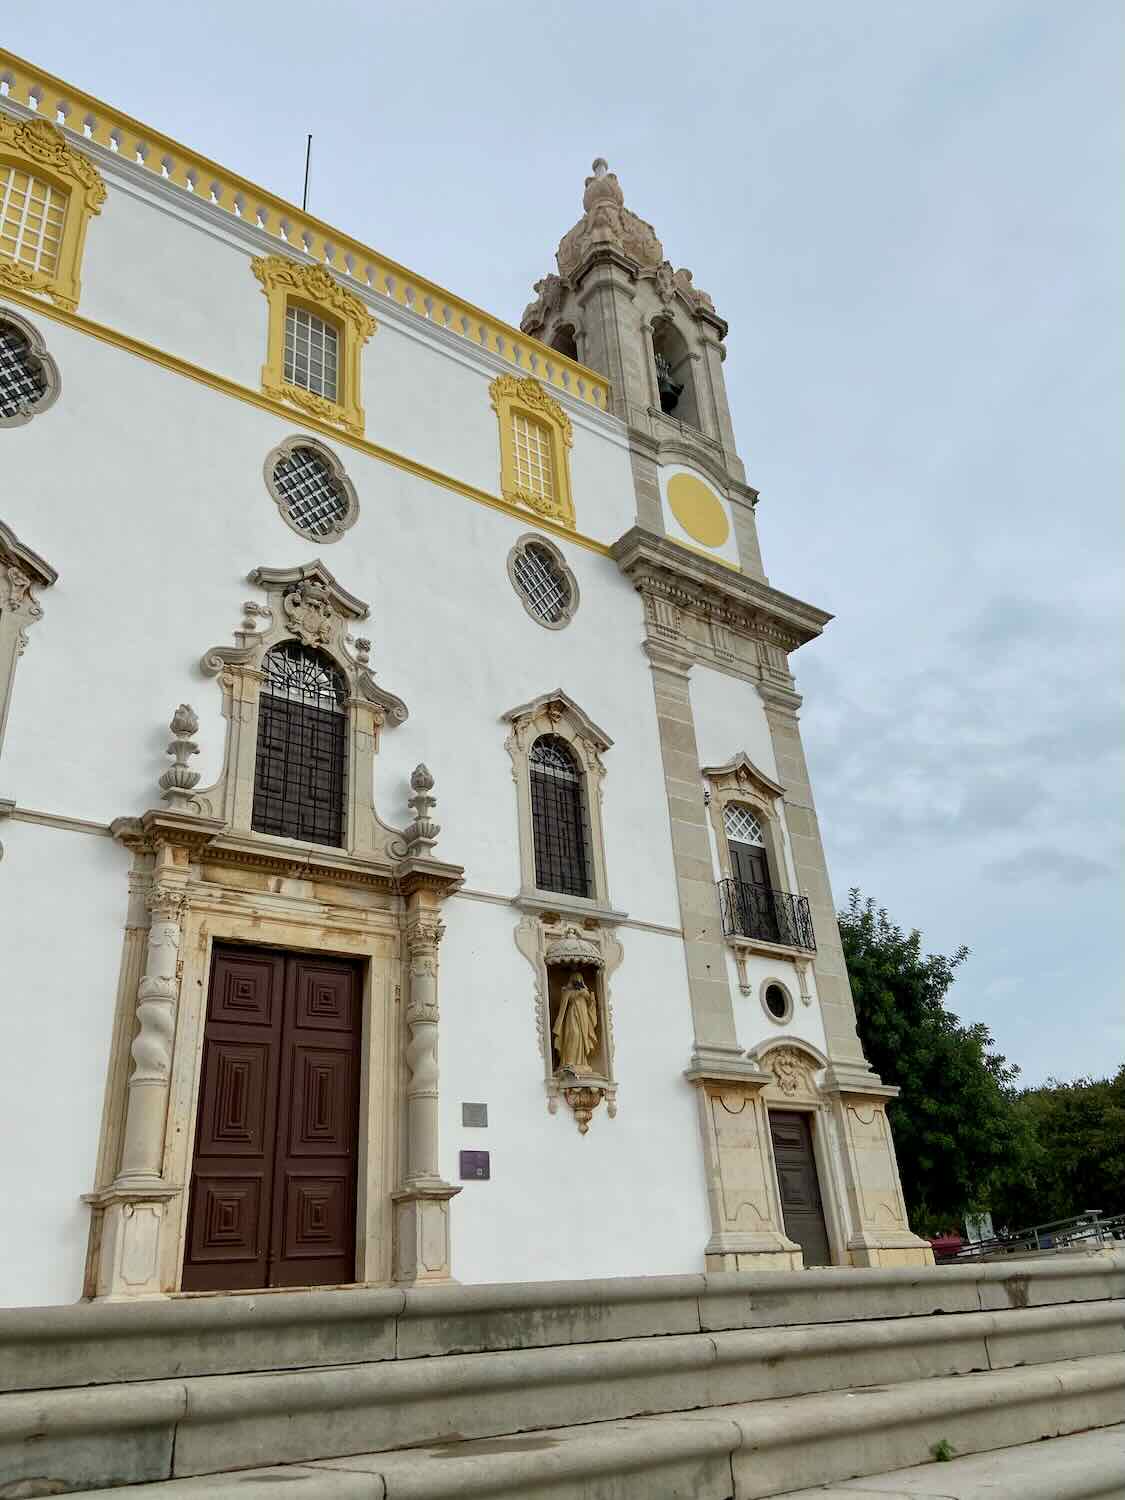 The striking façade of Carmo Church in Faro, displaying intricate Baroque architectural details with contrasting yellow trim around windows and ornate stone carvings, set against a cloudy sky.